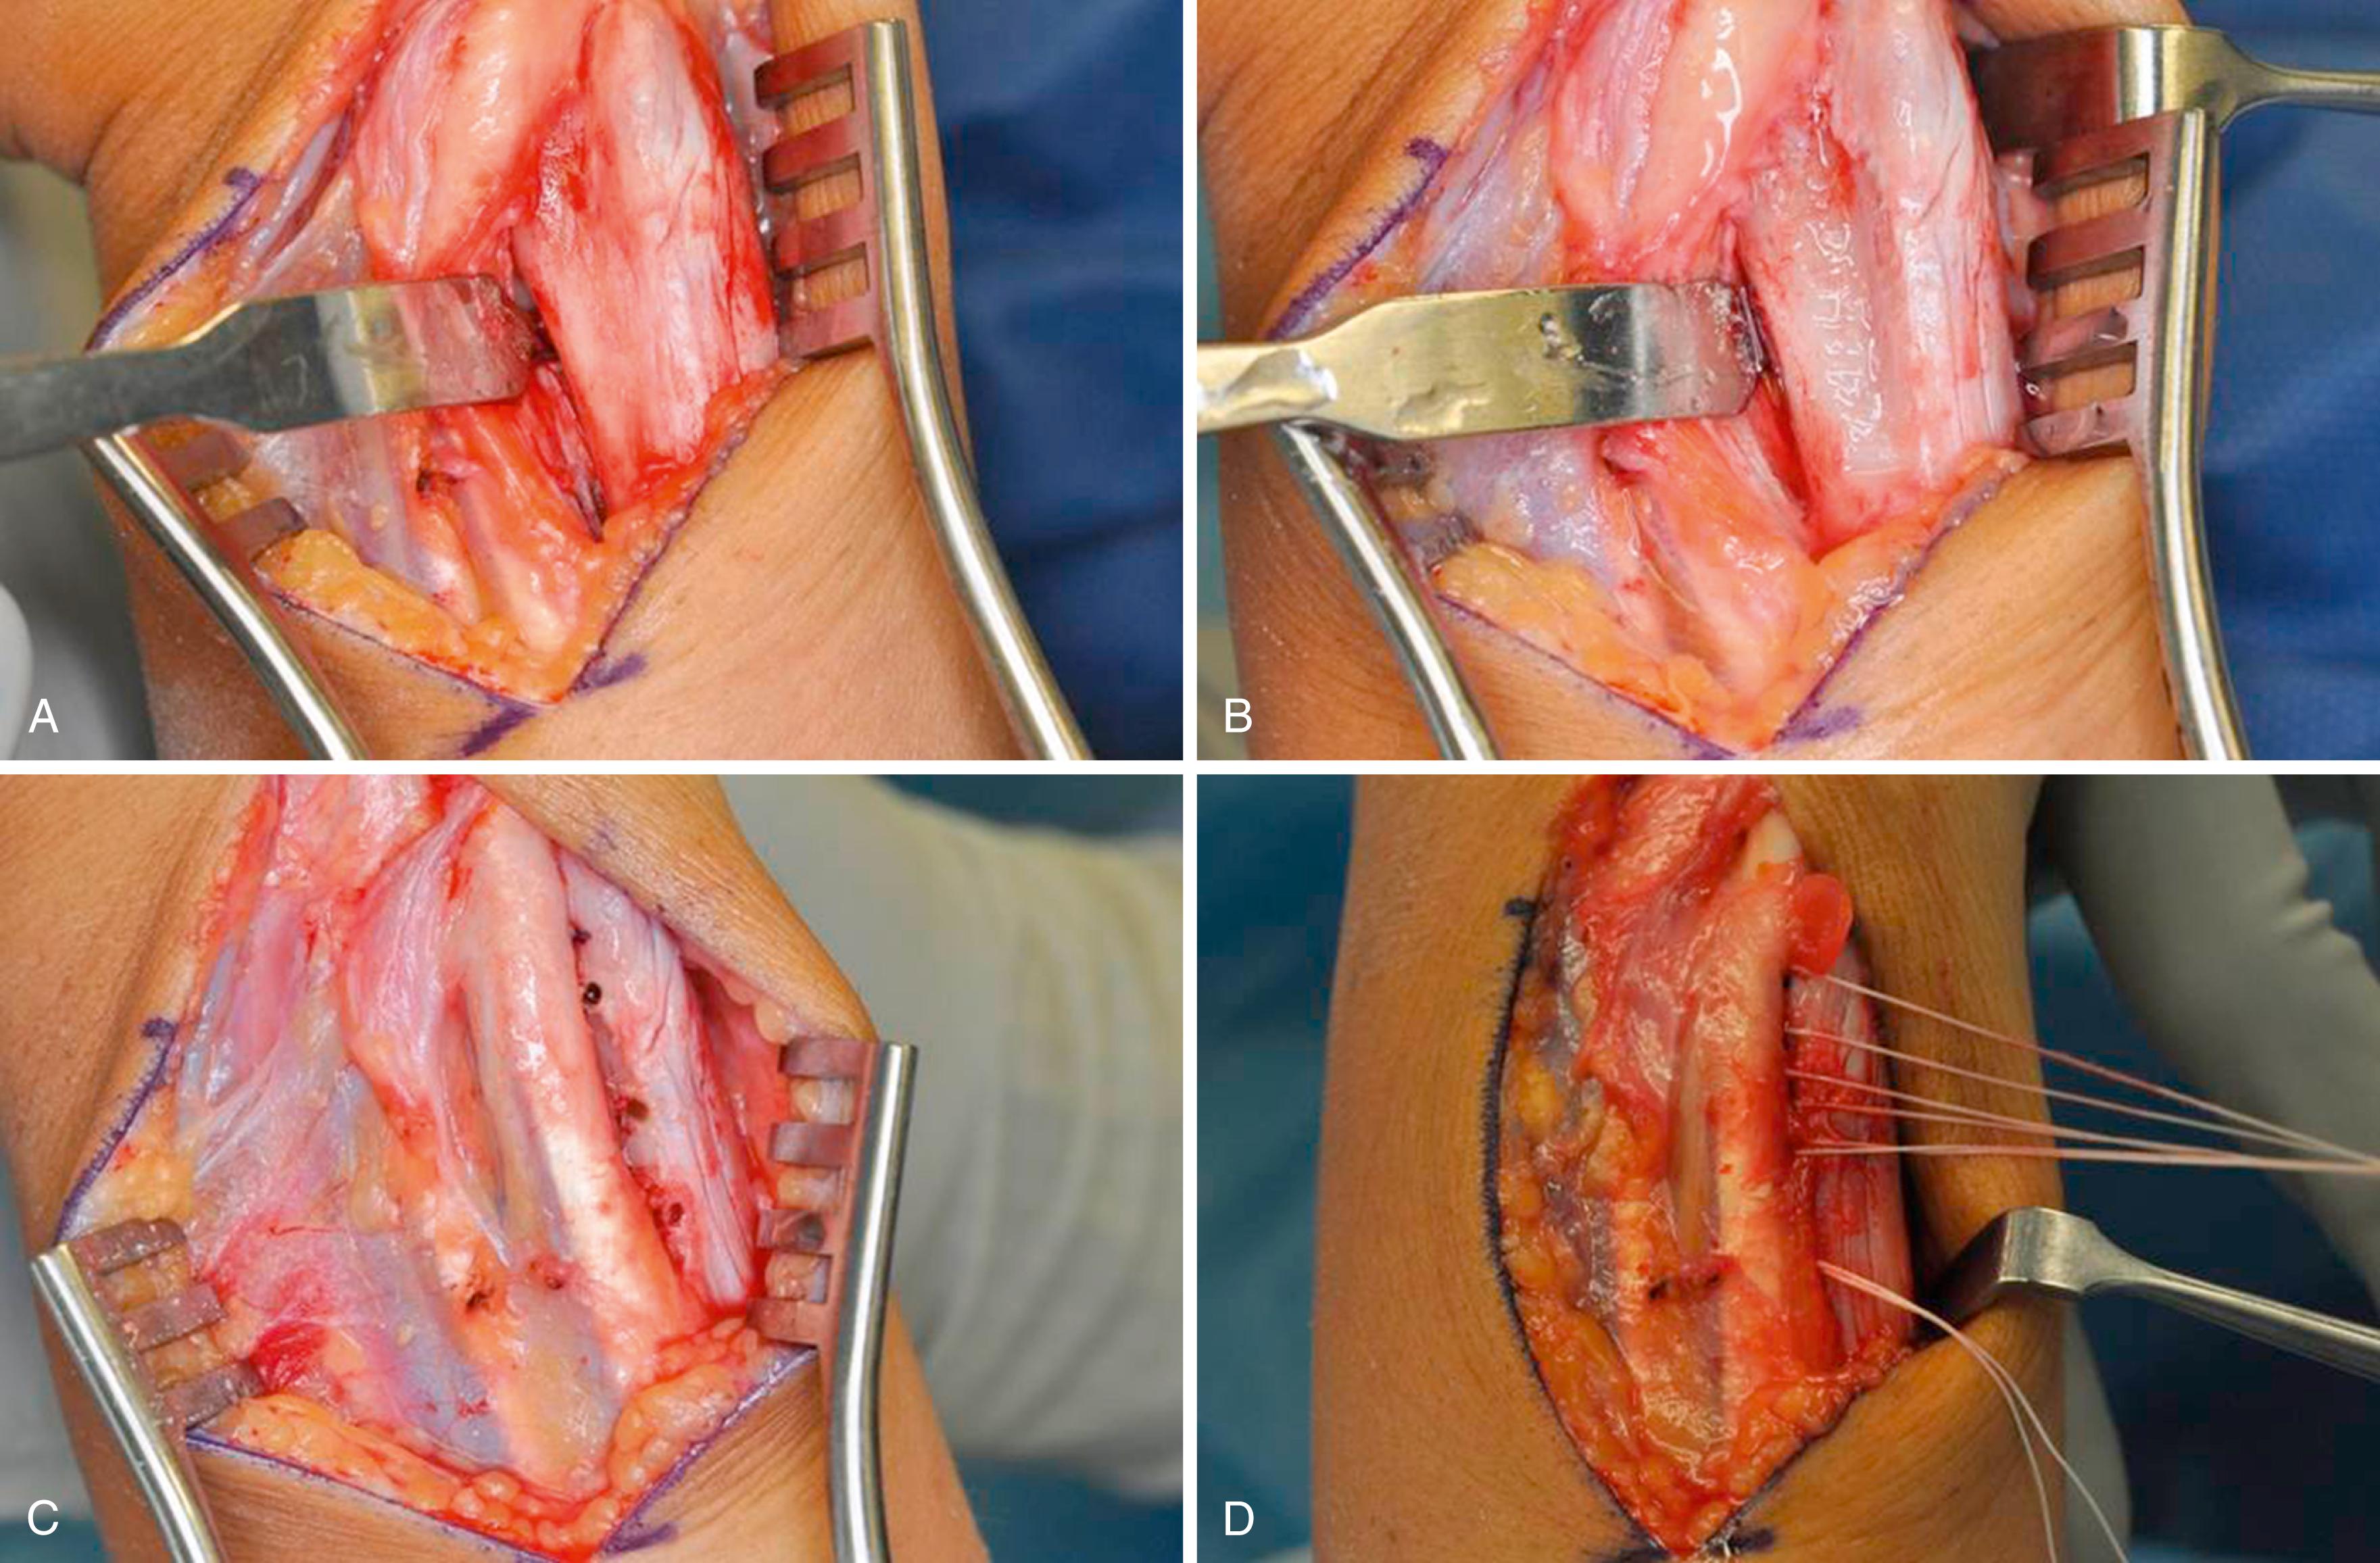 eFig. 14.4, A, Bennett retractor in interosseous space. B, Demonstrates extensor carpi ulnaris (ECU) groove (not deepened). C, Drill holes on ulnar side, multiple suture anchors placed. D, ECU subsheath imbricated and tied down.